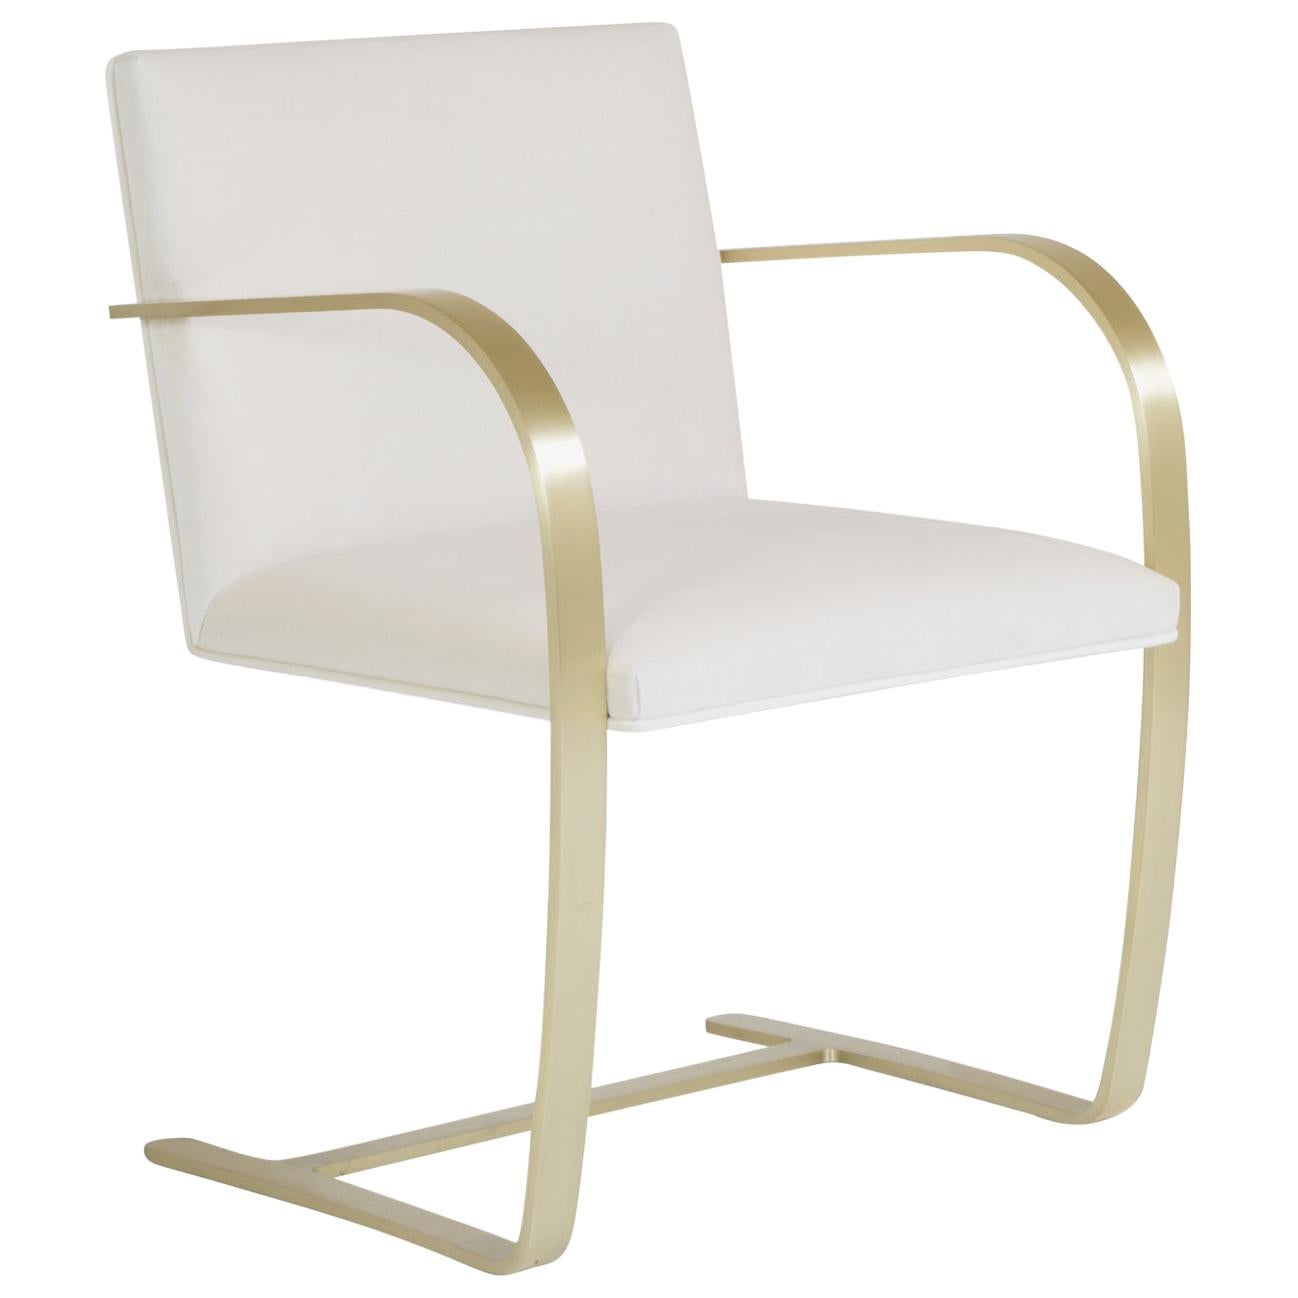 Brno Flat-Bar Chairs in Velvet, Brushed Brass by Mies van der Rohe for Knoll